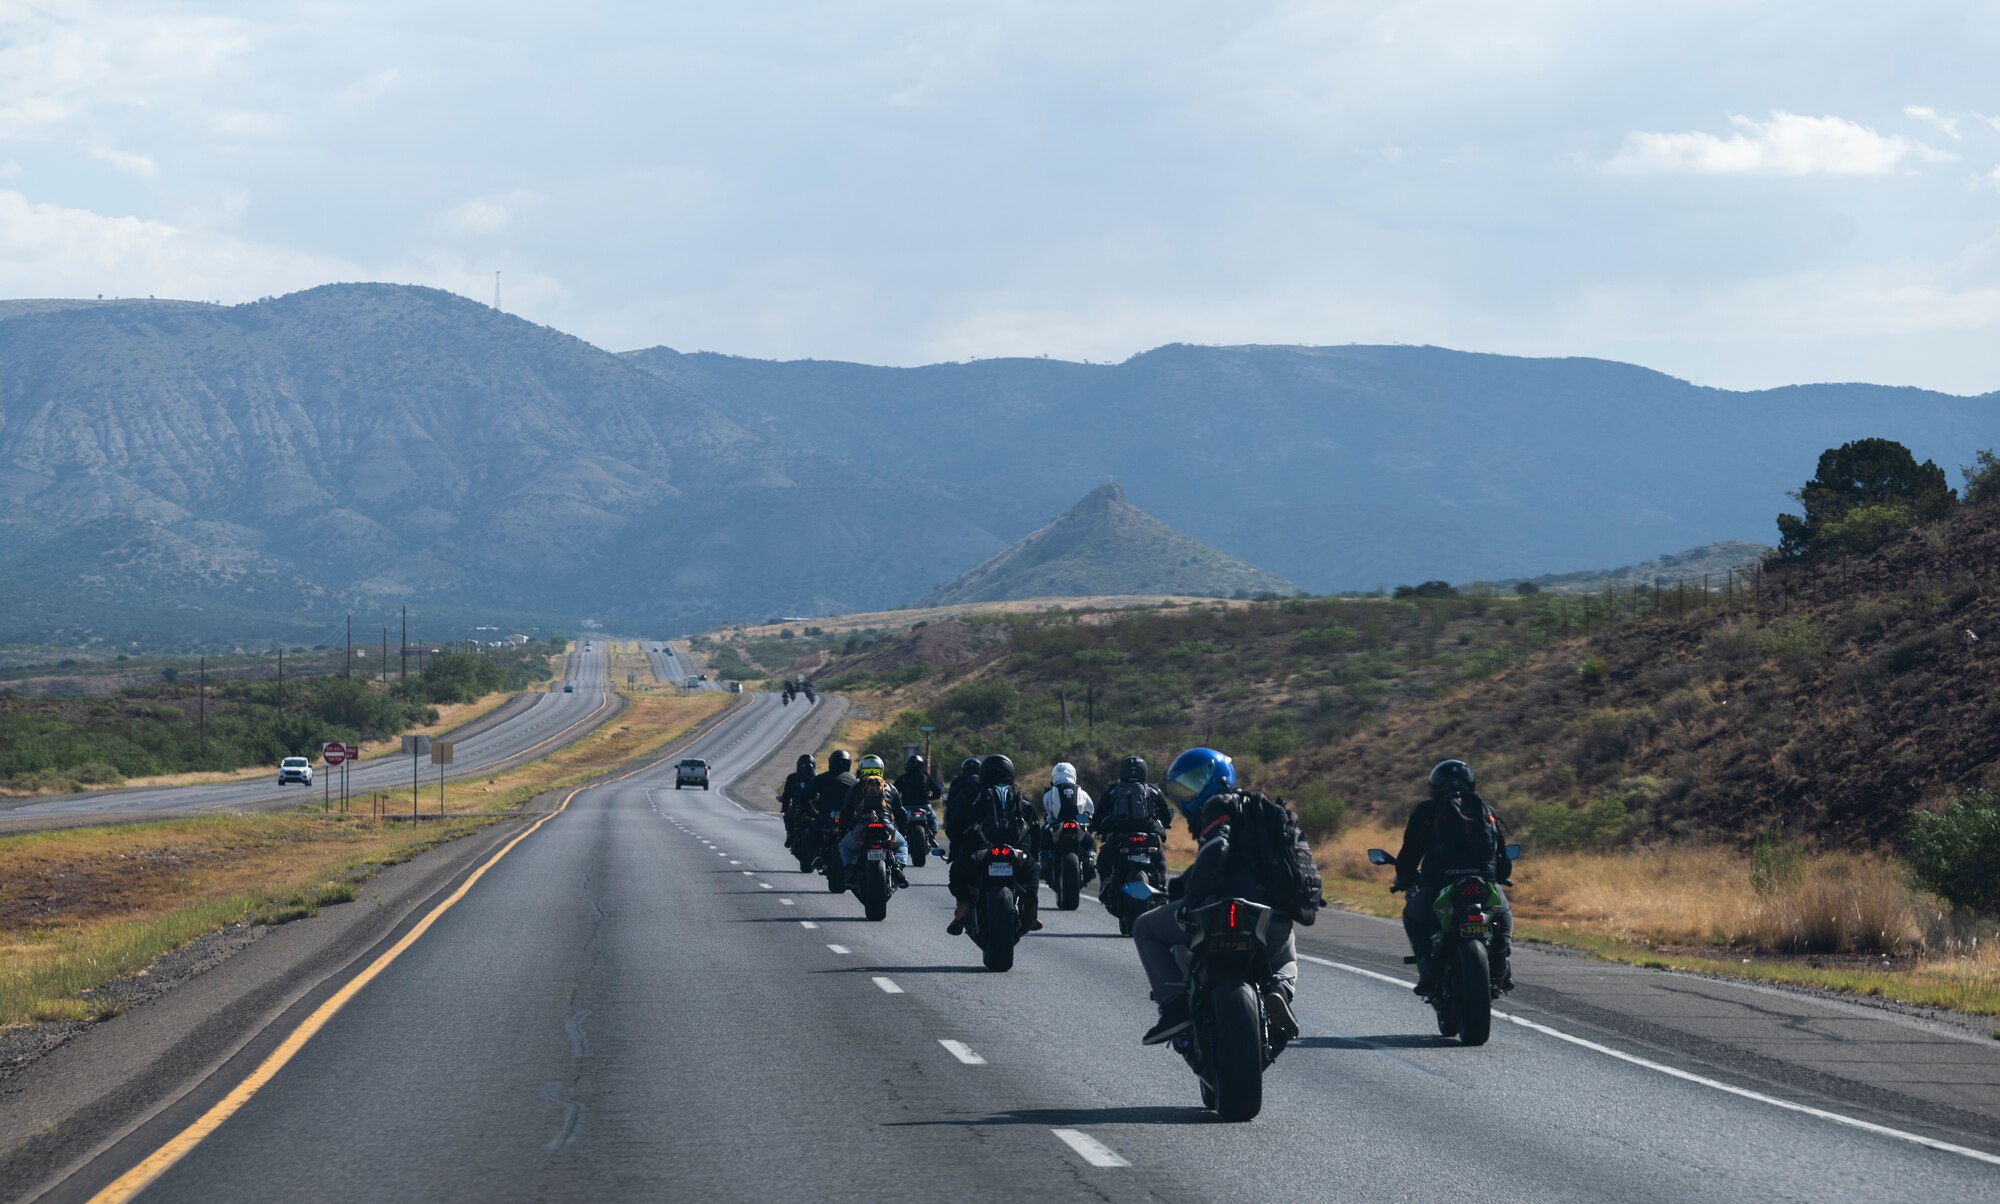 Airmen from Holloman travel through the countryside of New Mexico on their motorcycles during a group mentorship ride near Holloman Air Force Base, New Mexico, July 21, 2023. Mentorship rides allow commanders to coordinate counseling and inspections of riders to ensure they’re motorcycles are safe to operate and they possess serviceable safety equipment. (U.S. Air Force photo by Airman 1st Class Michelle Ferrari)